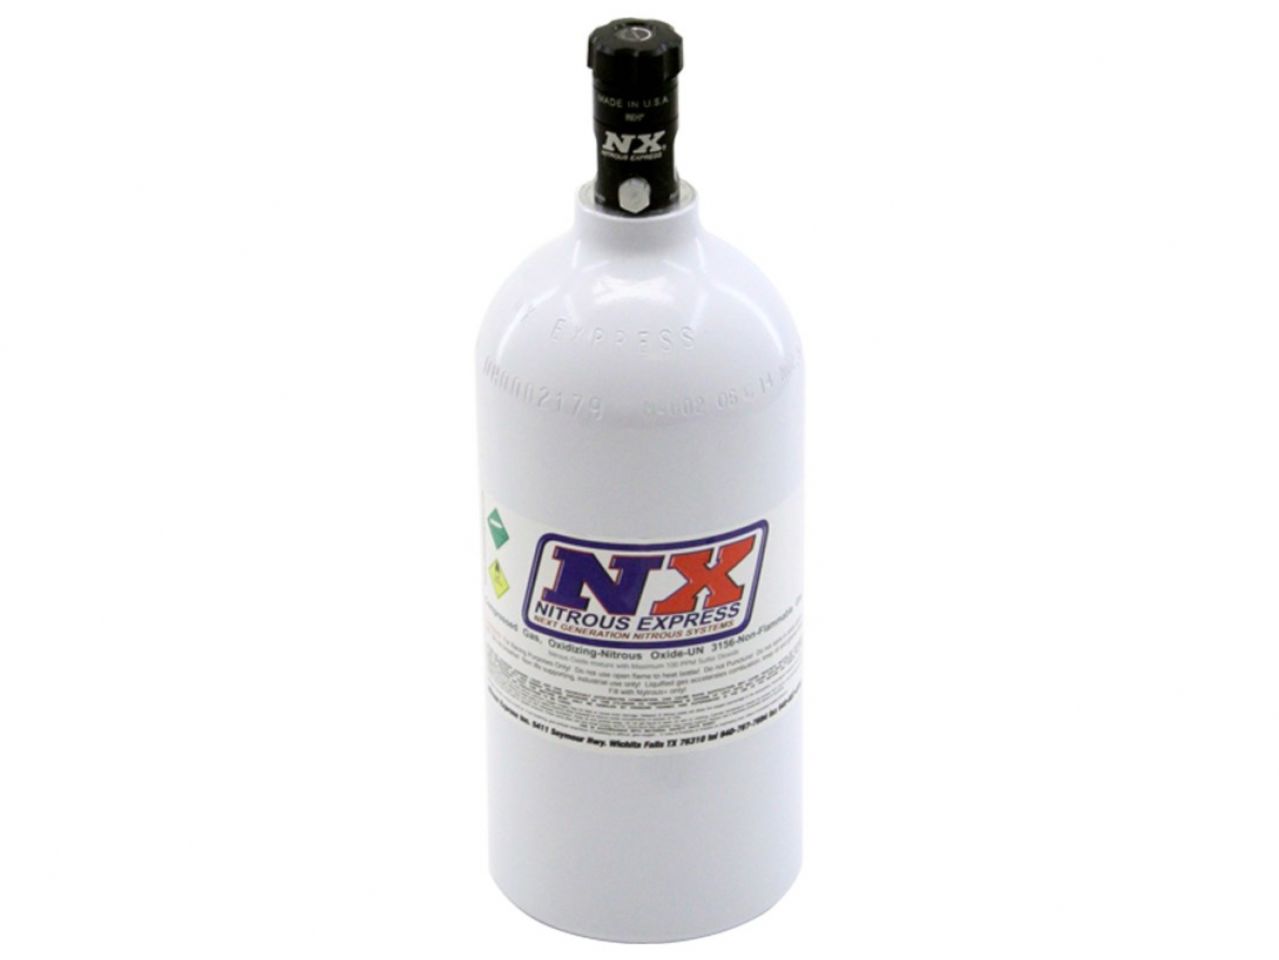 Nitrous Express Nitrous Oxide Kits and Accessories 11025 Item Image